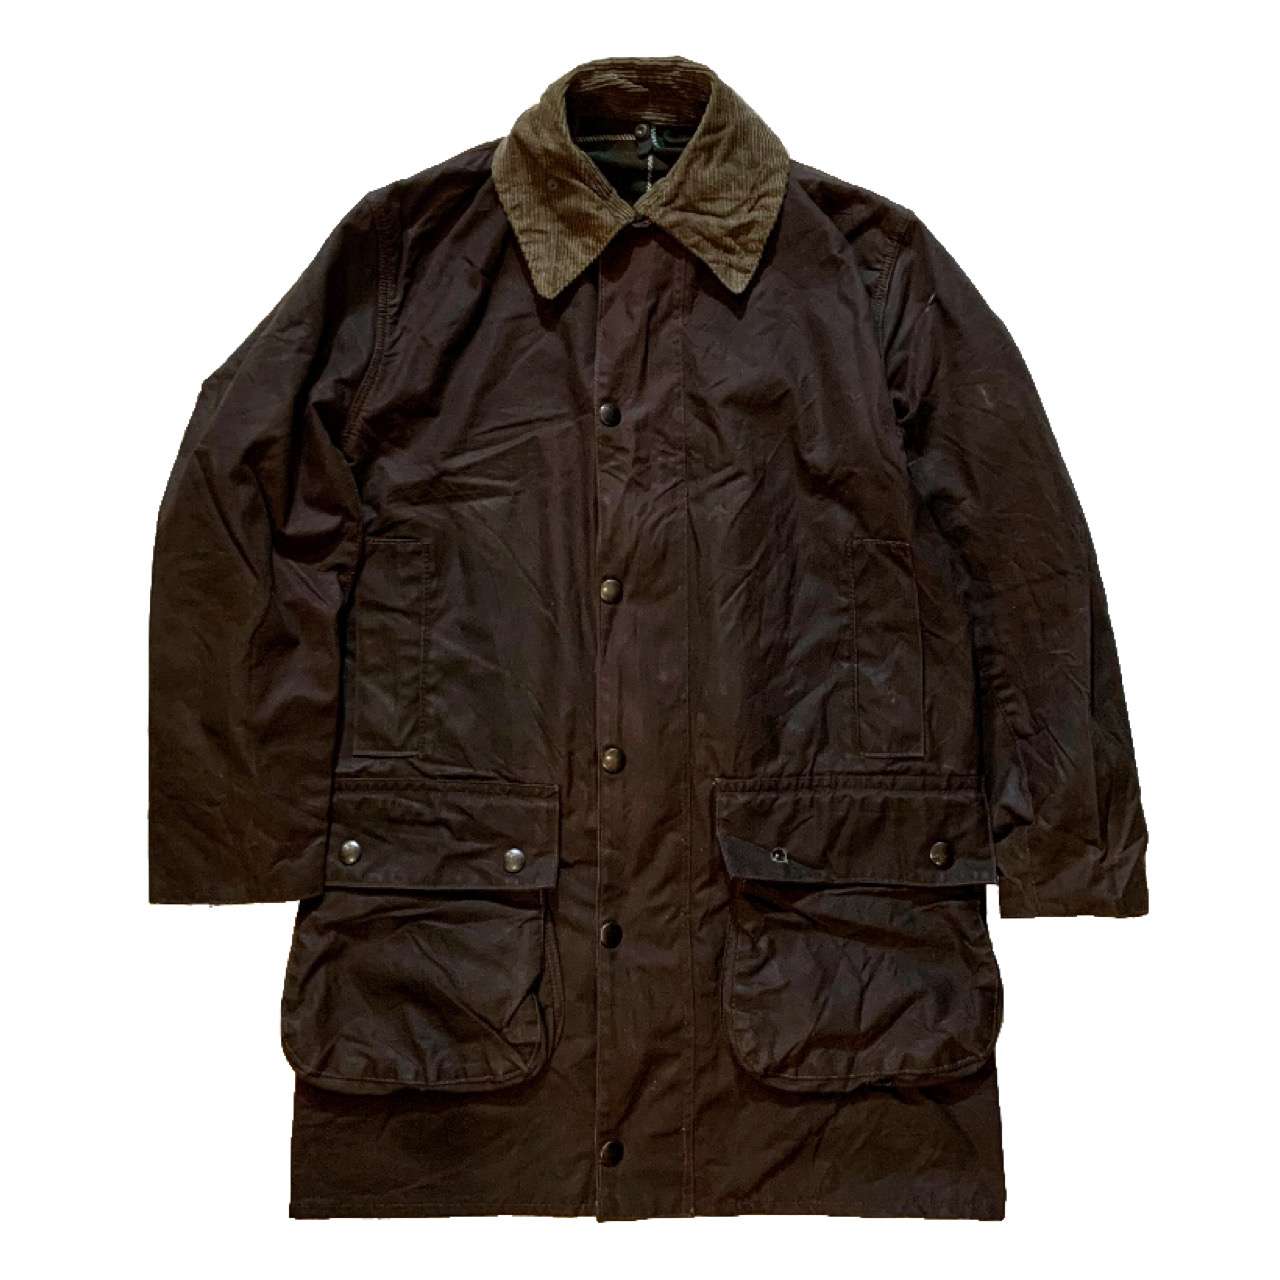 80’s Barbour NORTHUMBRIA Waxed Jacket